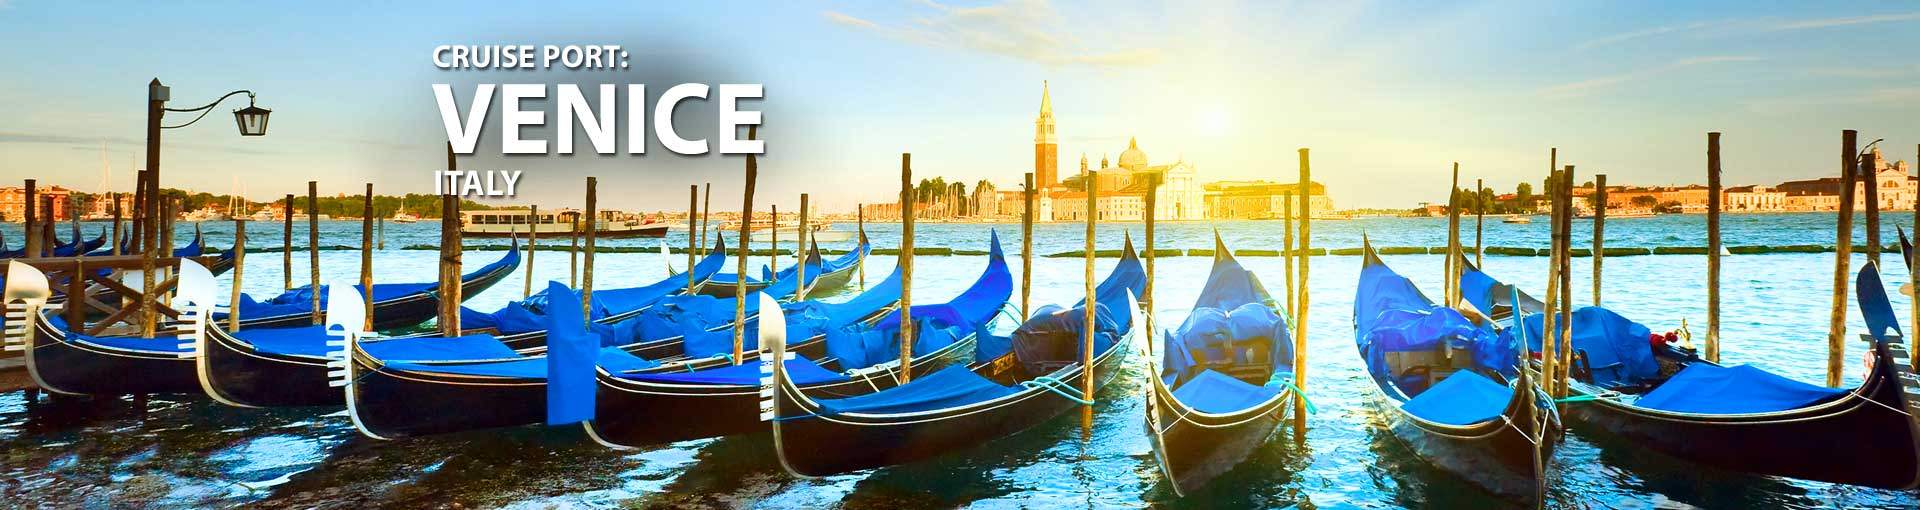 Venice, Italy Cruise Port, 2019, 2020 and 2021 Cruises from Venice ...